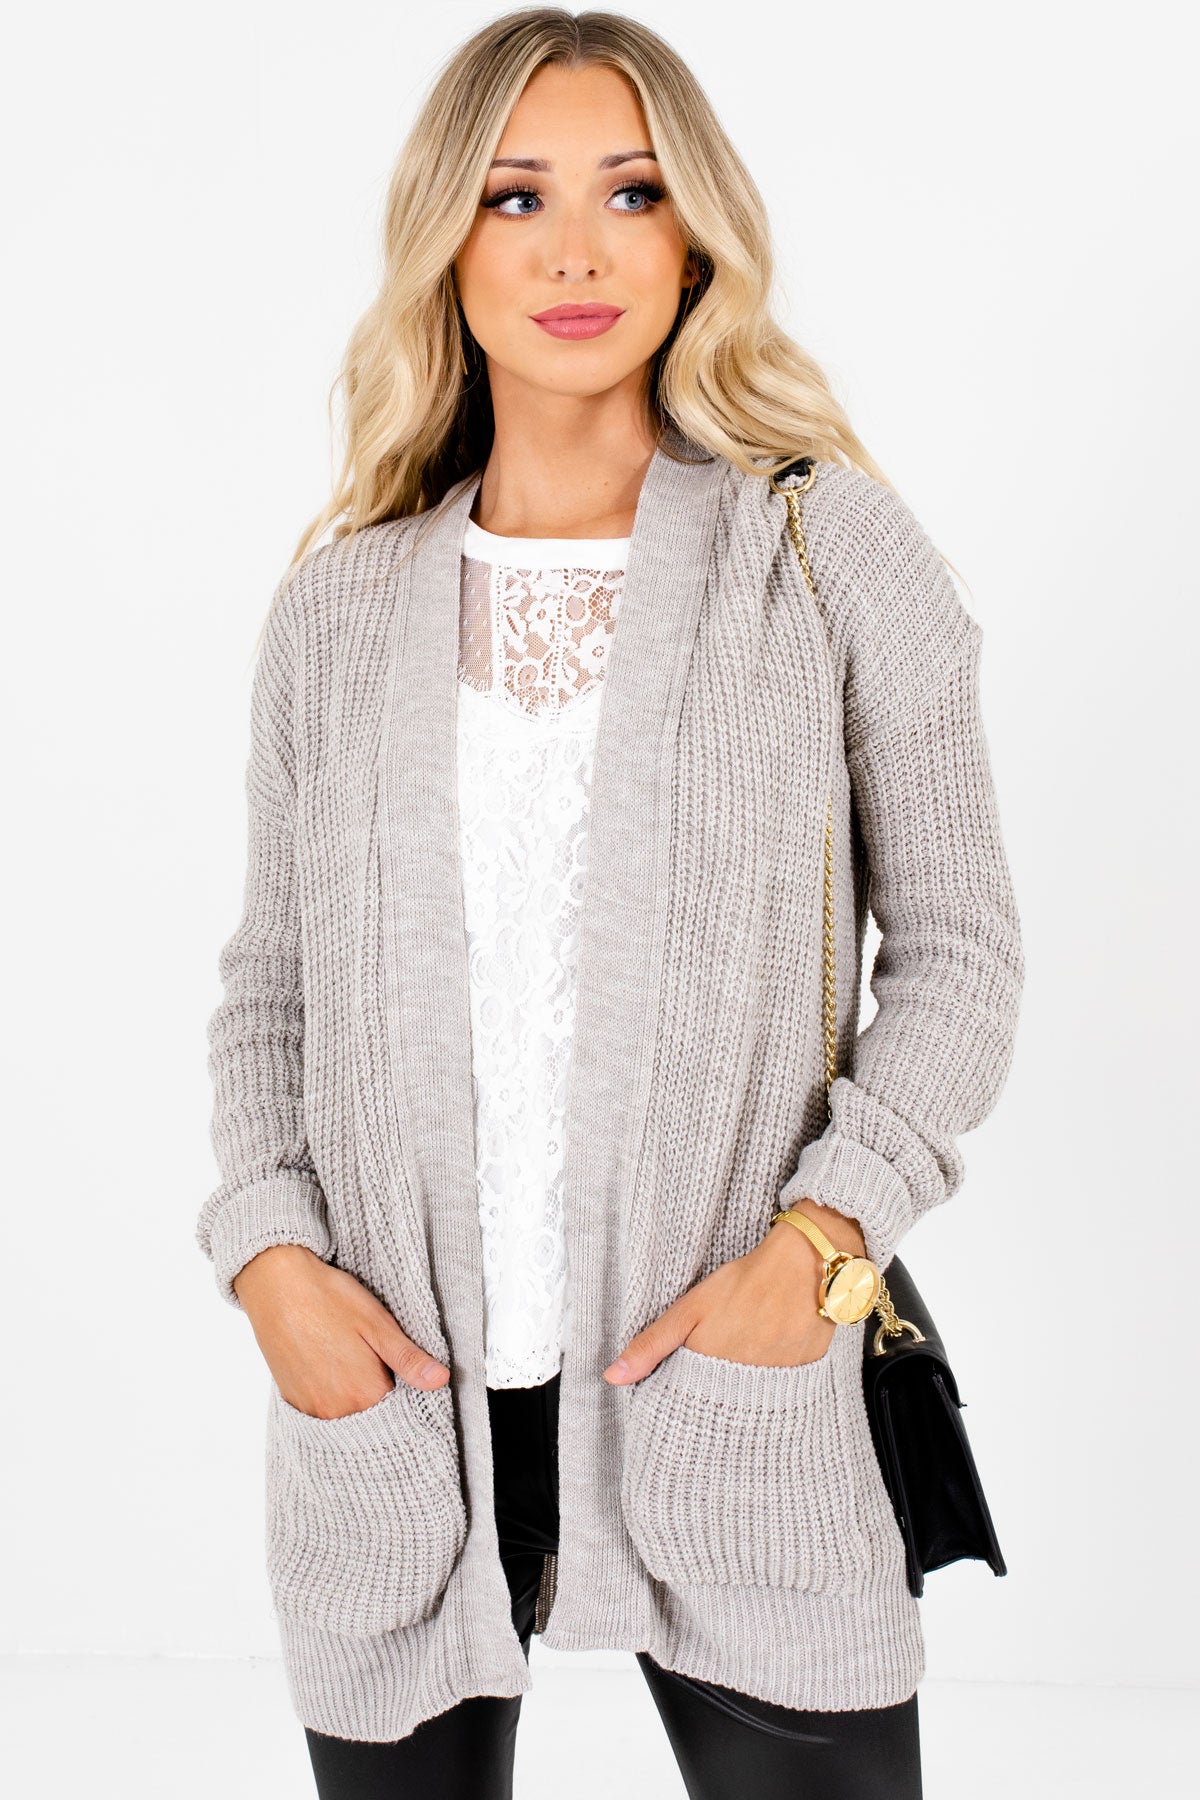 Women’s Heather Gray Casual Everyday Boutique Cardigan